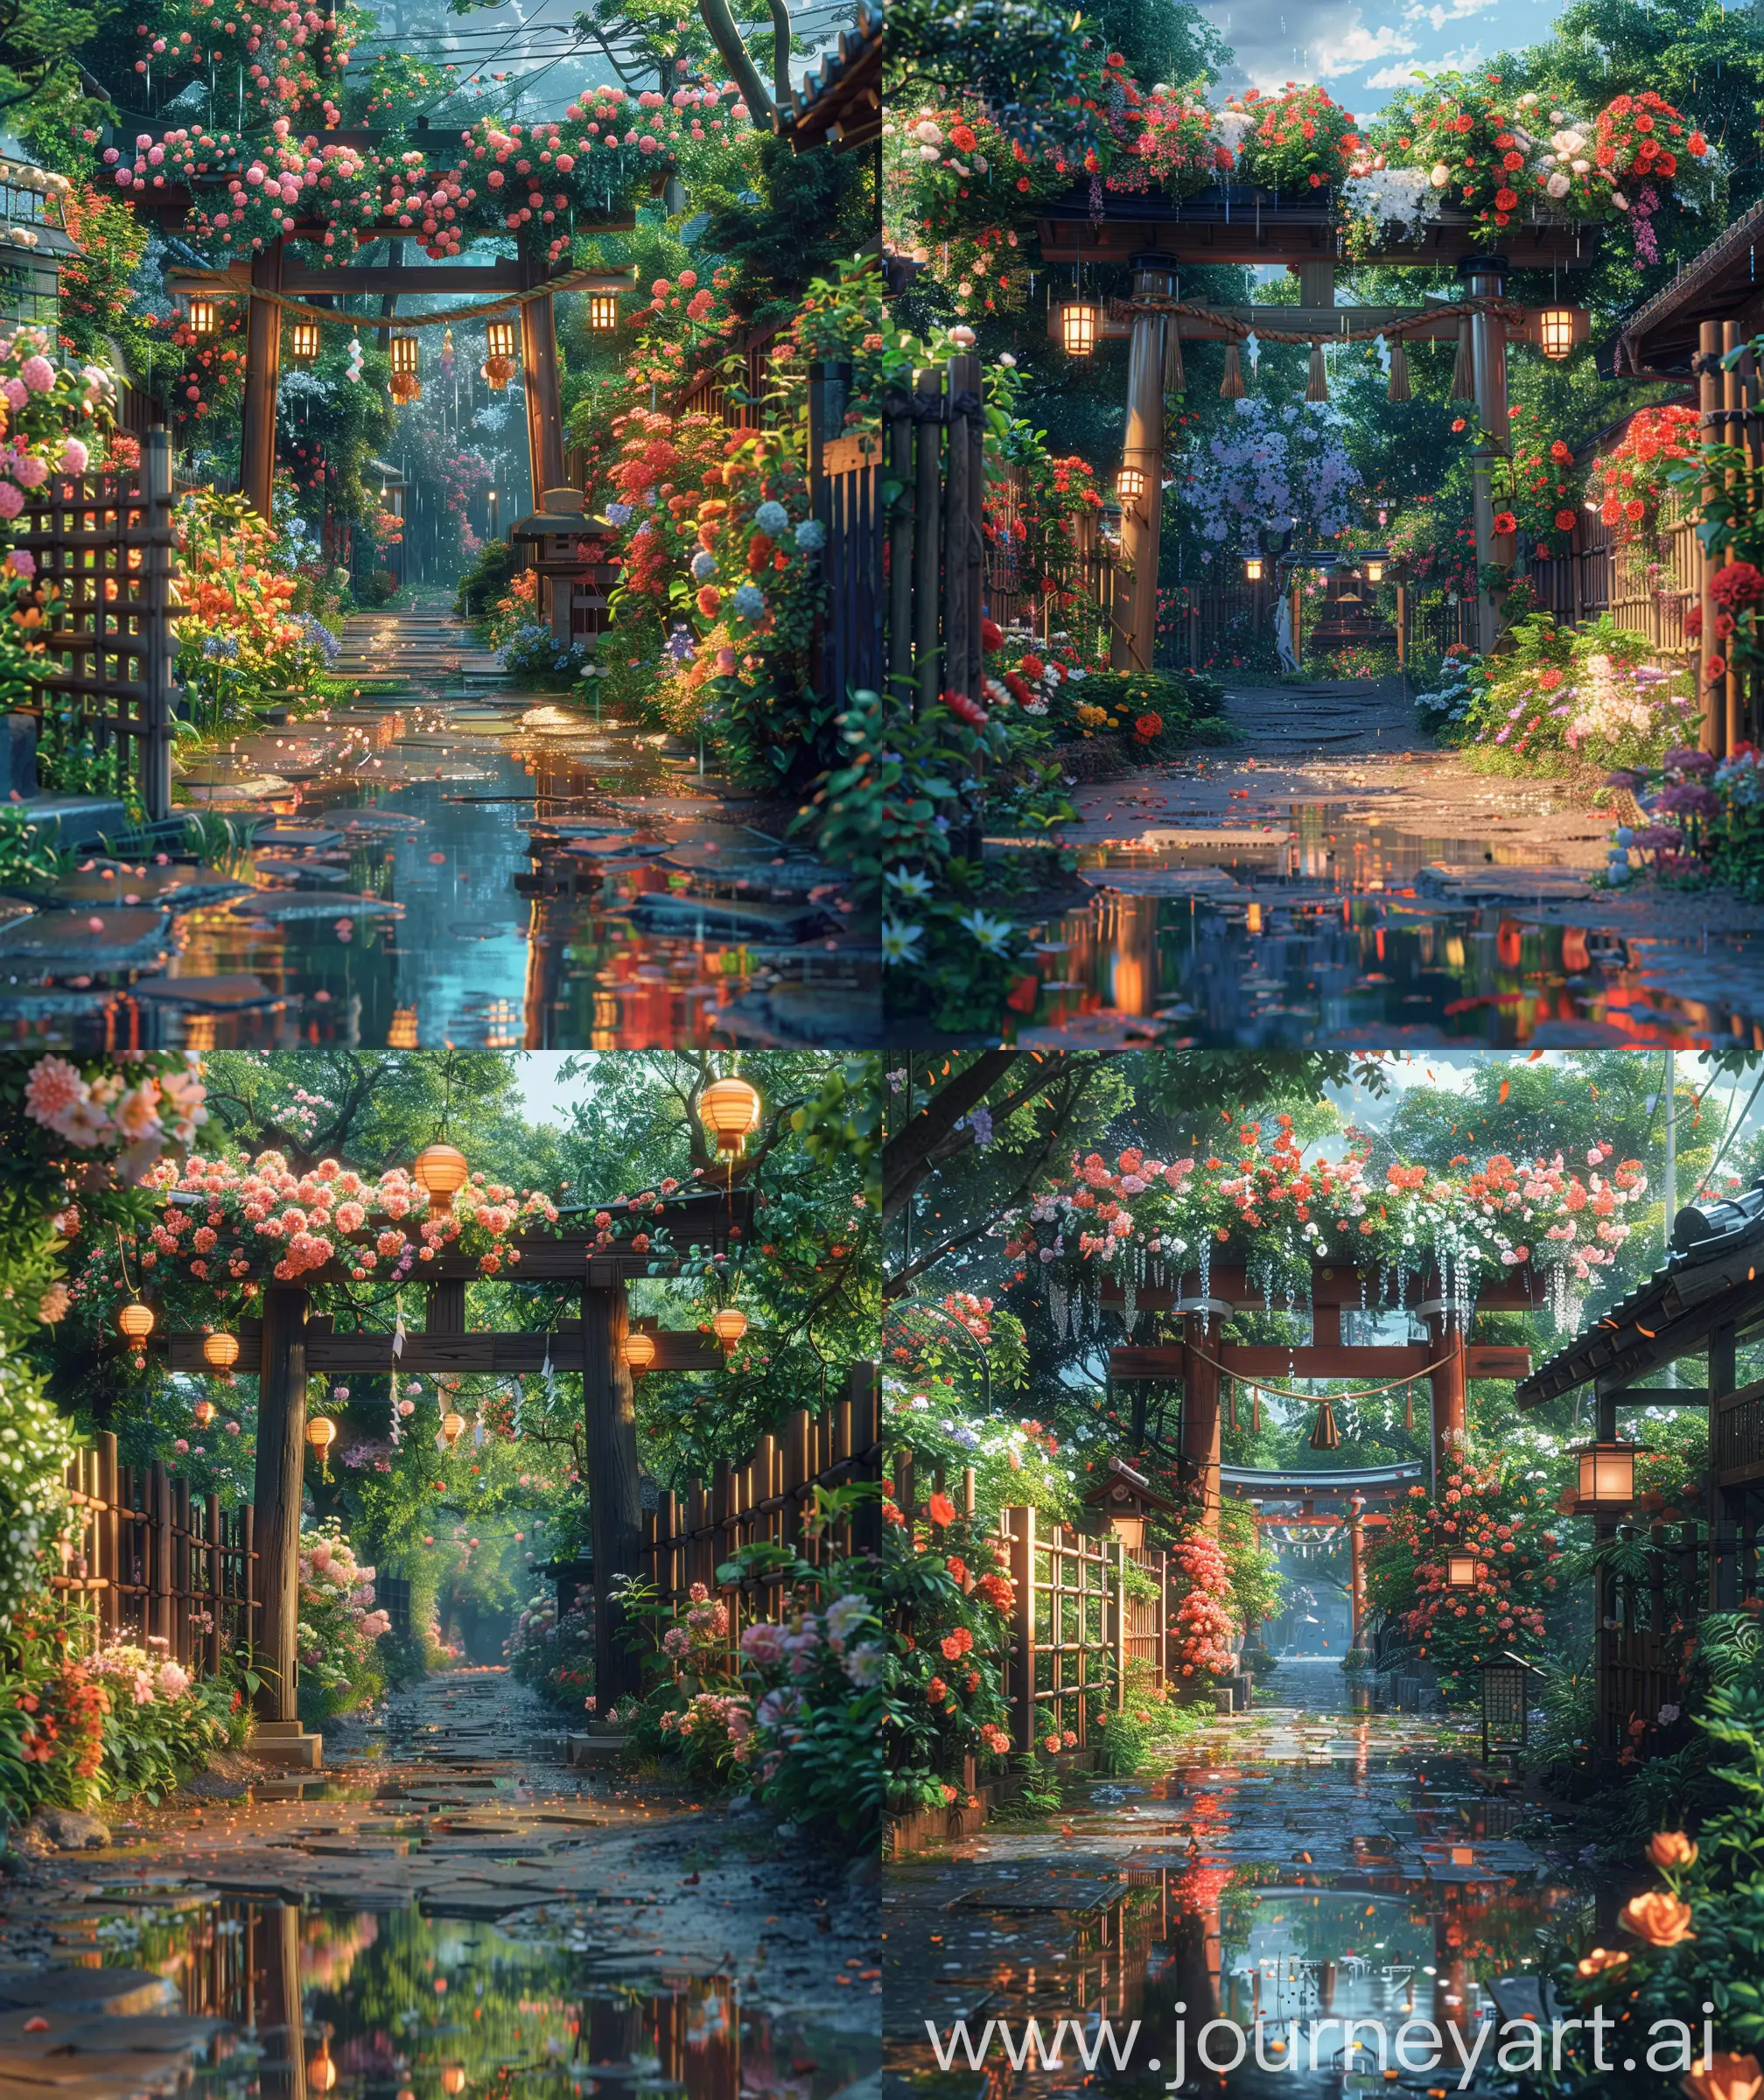 Enchanting-Anime-Torii-Gate-Amidst-Blossoming-Flowers-and-Hanging-Lights